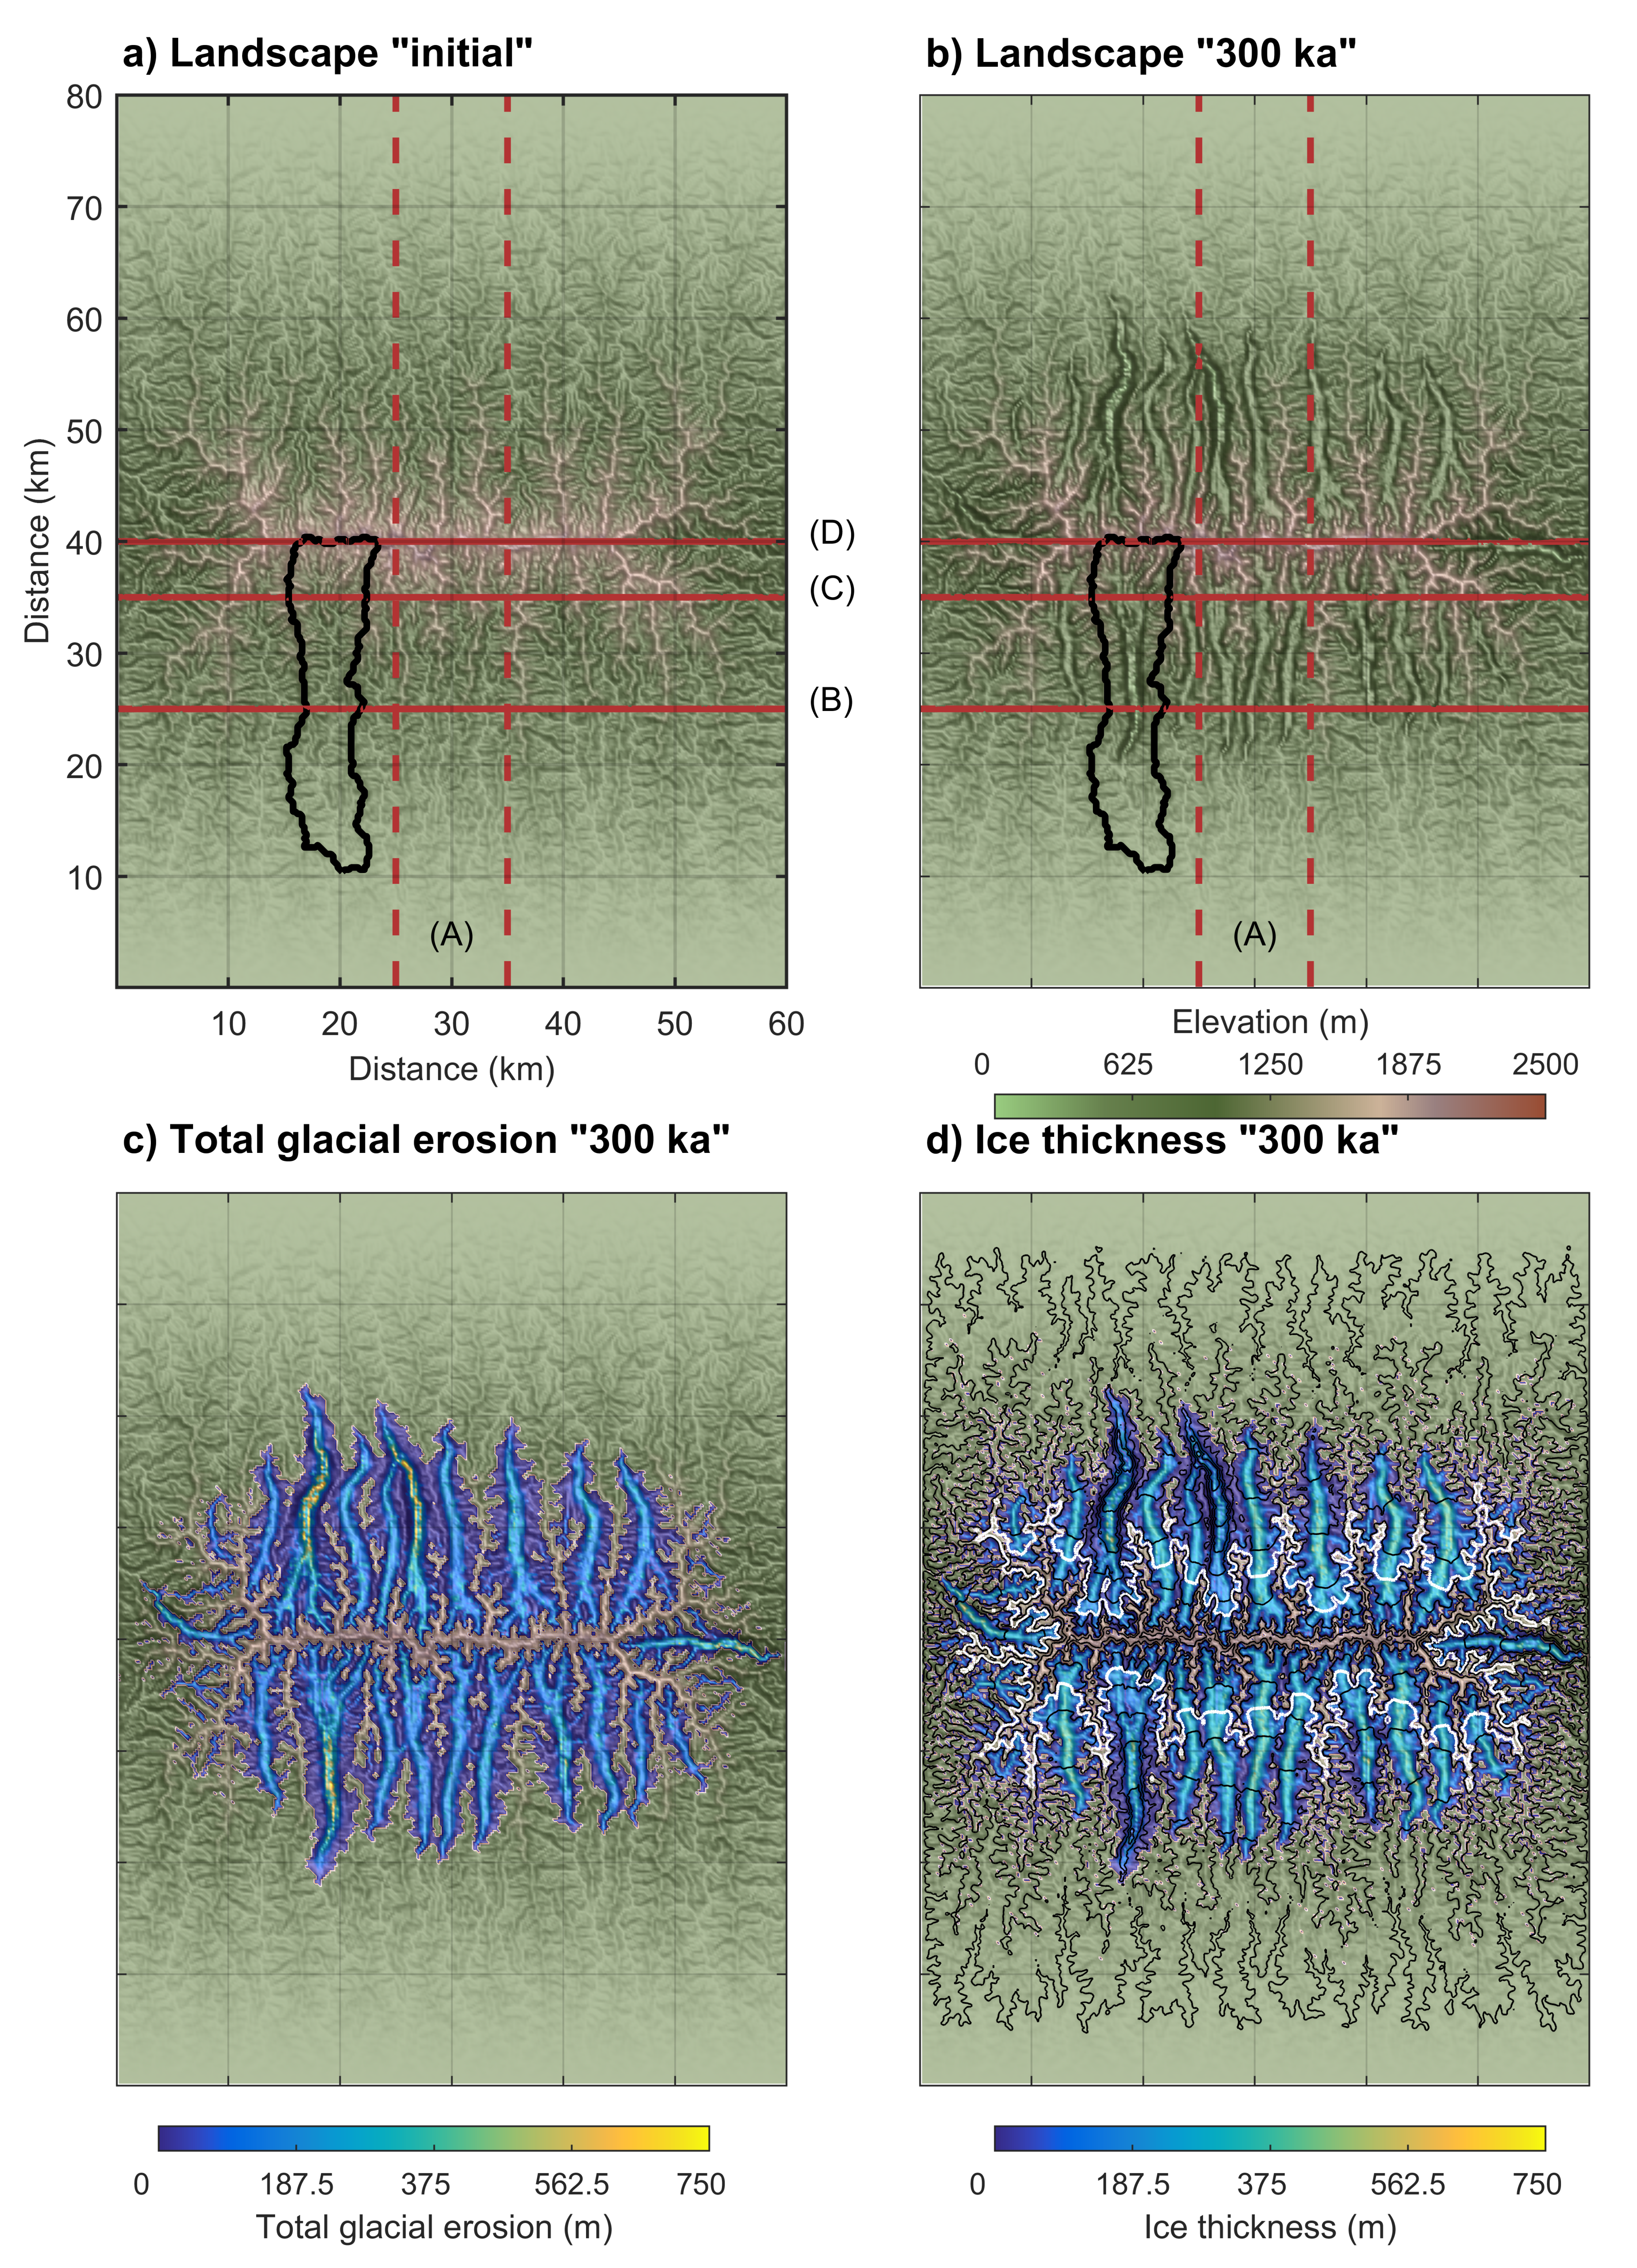 Topographic changes during fluvial to glacial landscape transformation